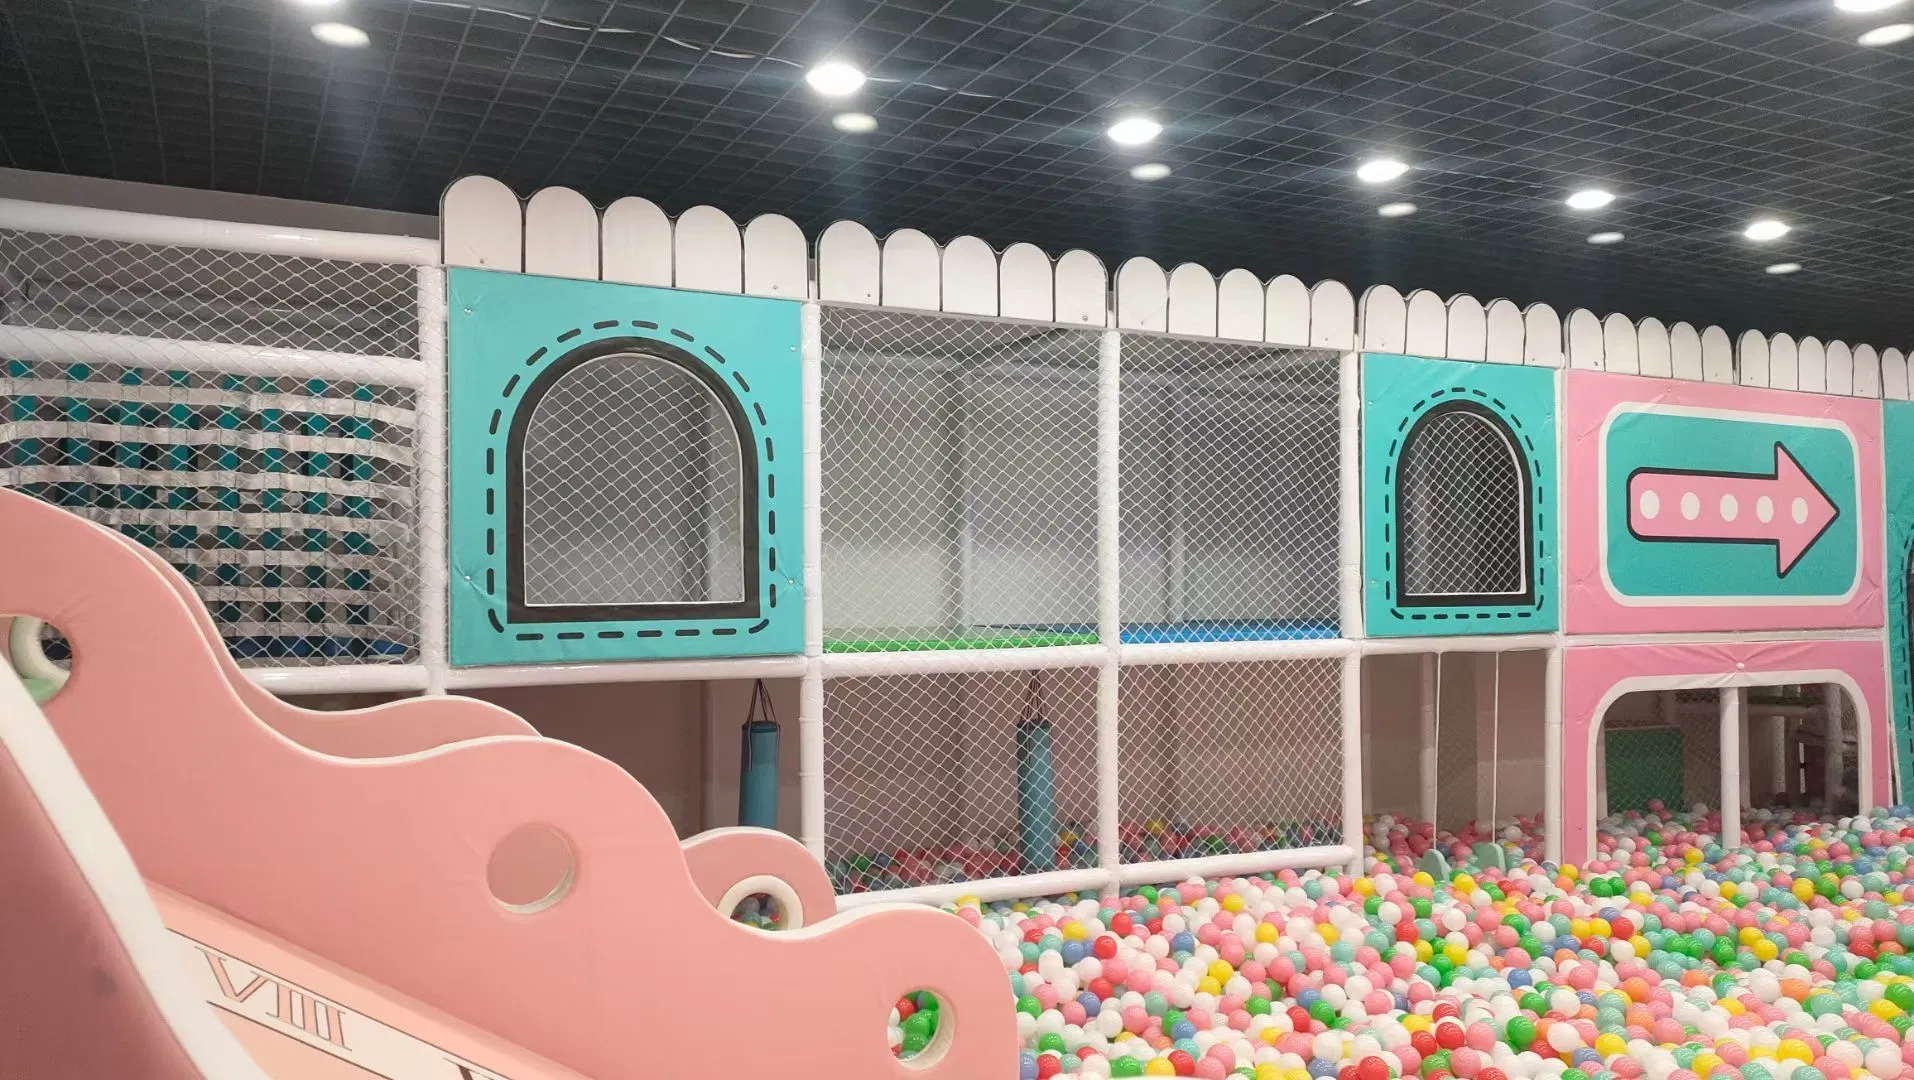 Soft Game Children's Indoor Playground Complete Equipment Large Ball Pool Children's Toys